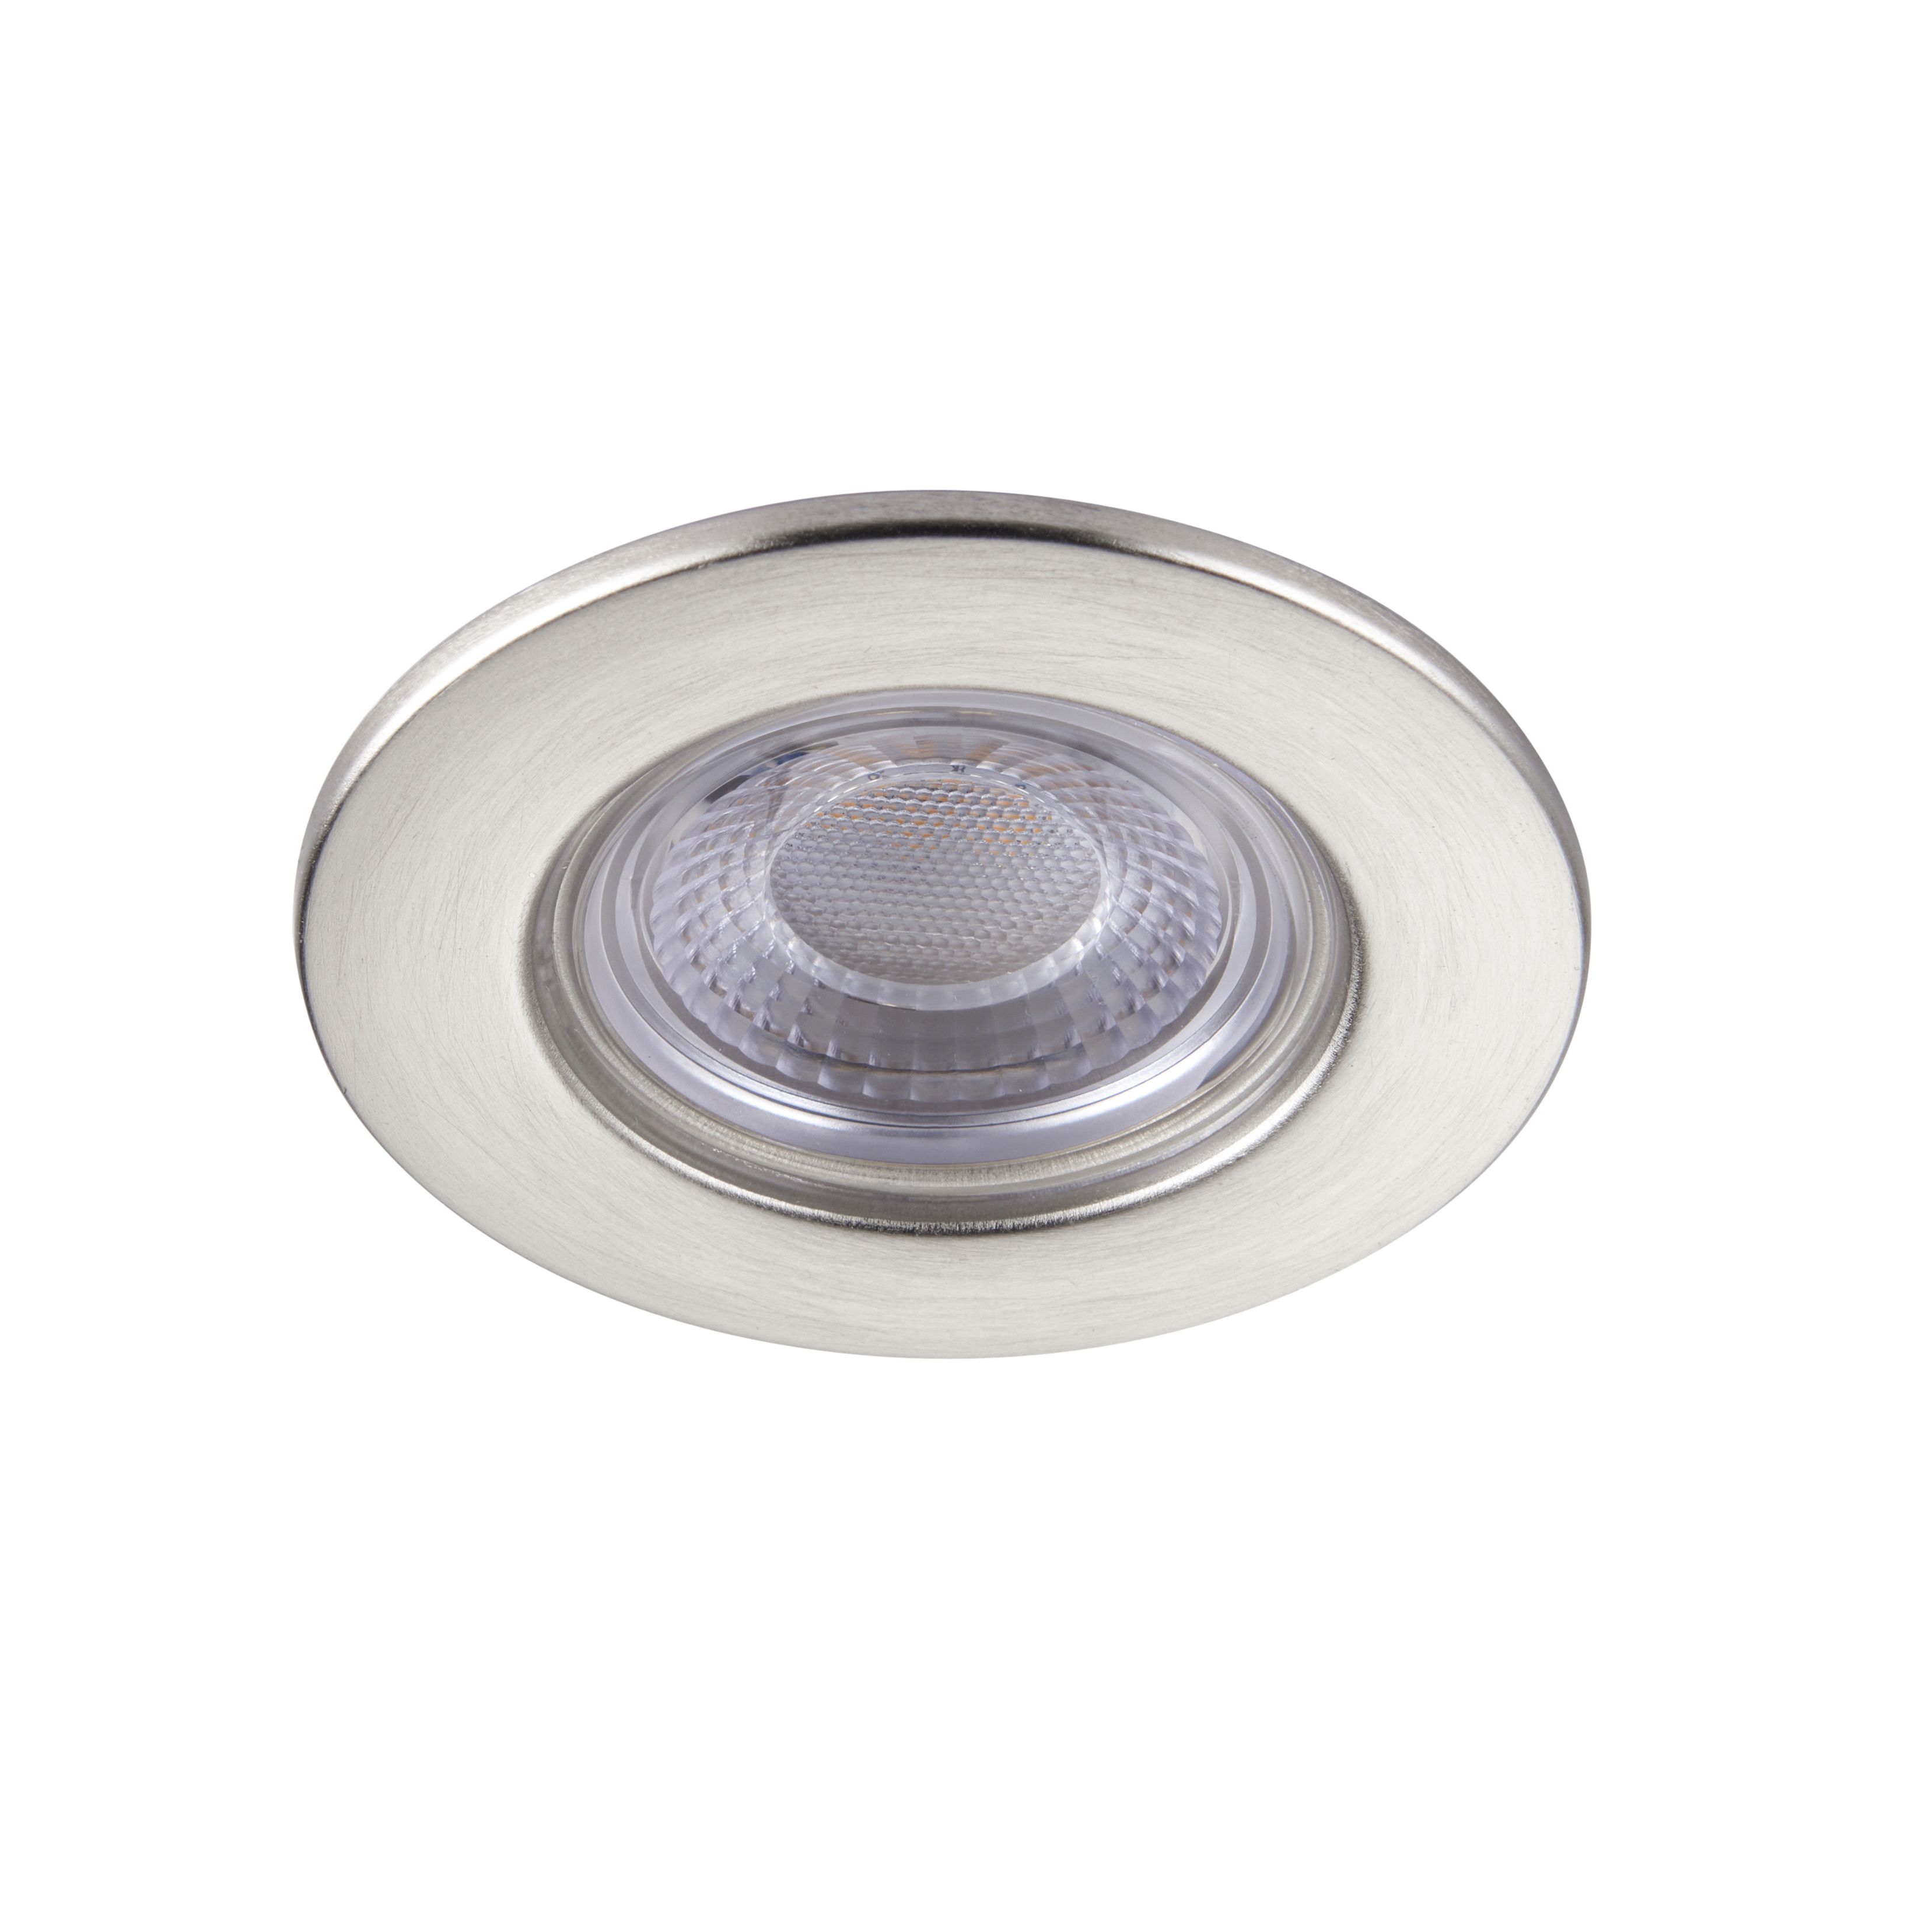 GuardECO Nickel effect Non-adjustable LED Cool white Downlight 6W IP65